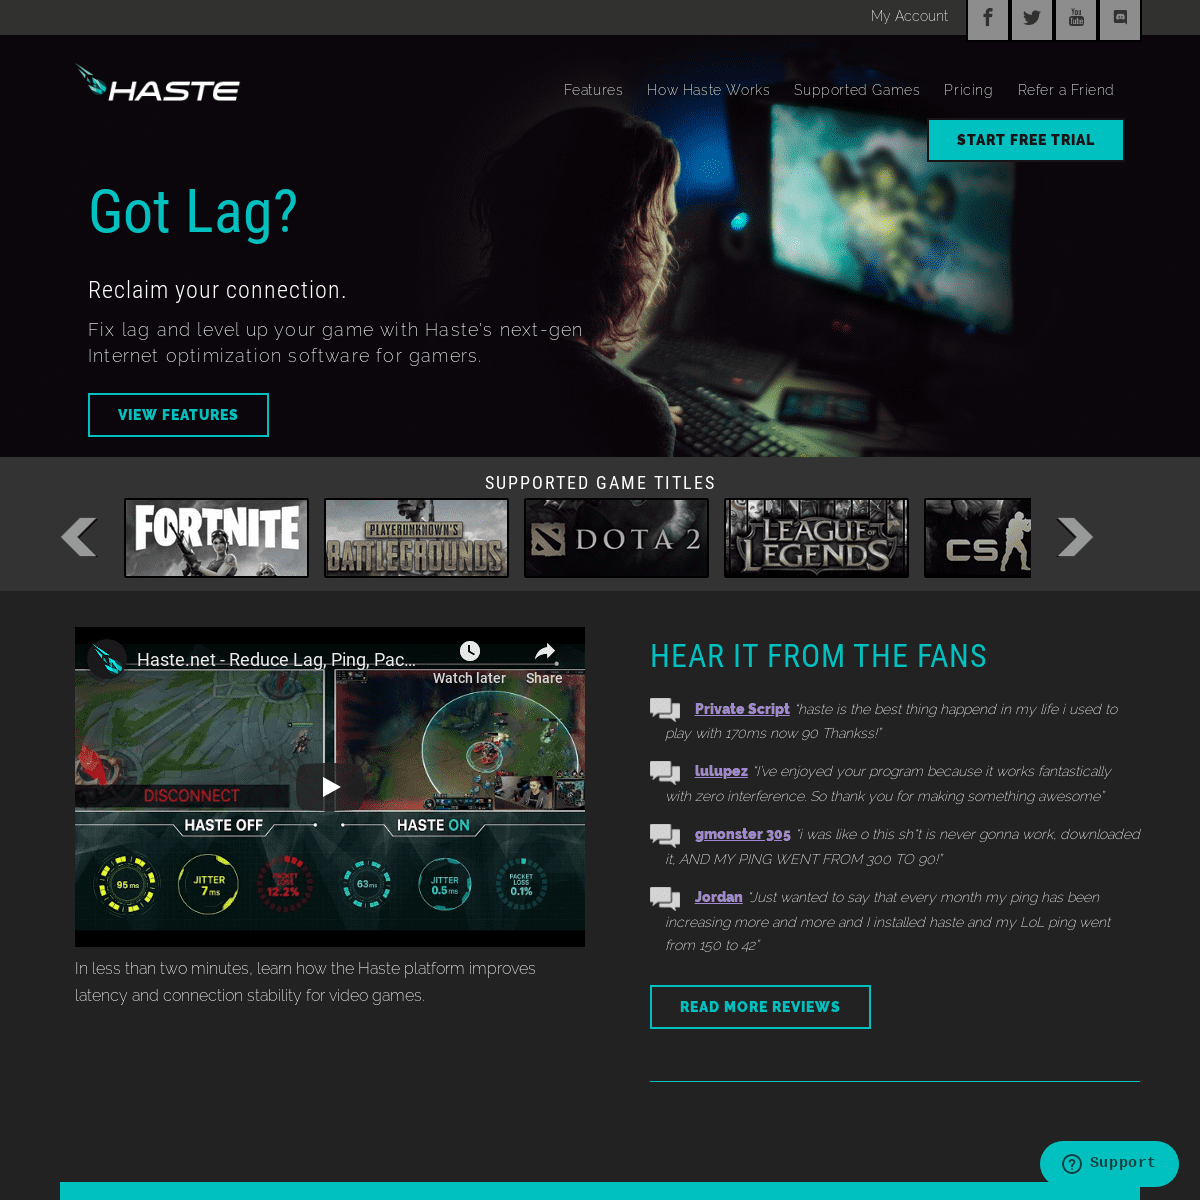 Haste - Reduce Lag, Ping and Jitter in gaming. Get Tools for Gamers.